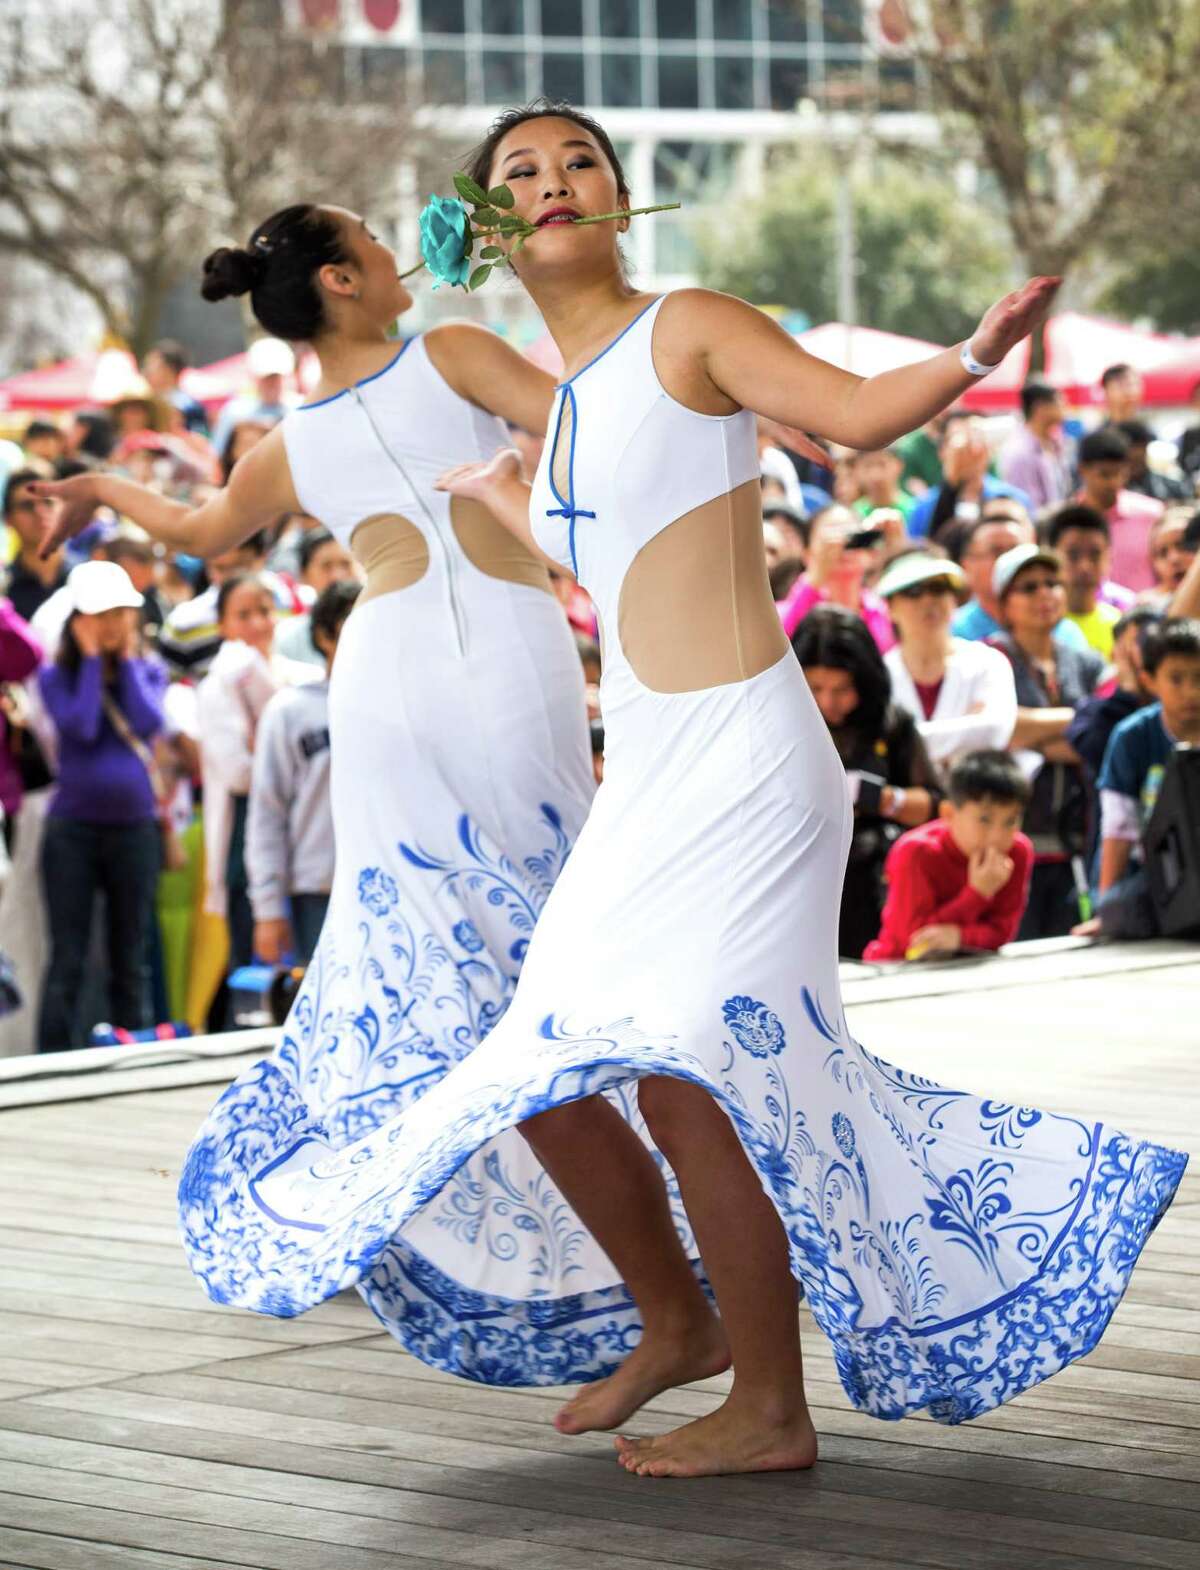 Dancers of the Flower dance troupe perform during the 19th Annual Texas Lunar New Year Celebration at Discovery Green on Saturday, Feb. 21, 2015, in Houston.